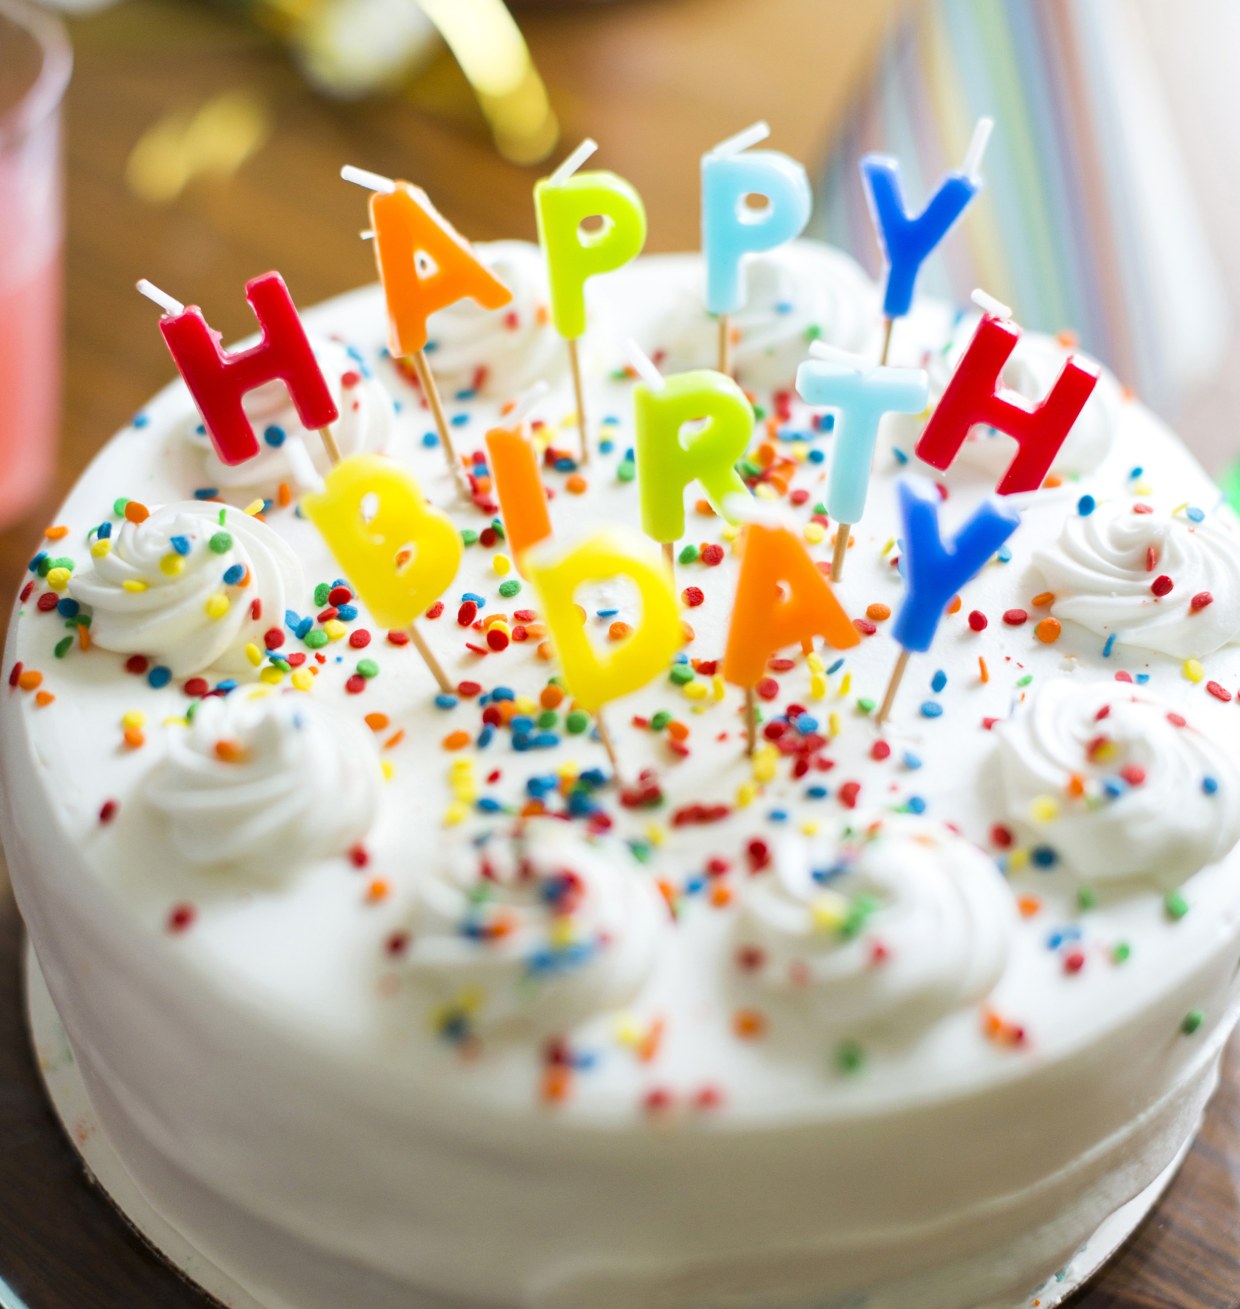 U.S. Judge Rules Copyright for 'Happy Birthday to You' Invalid